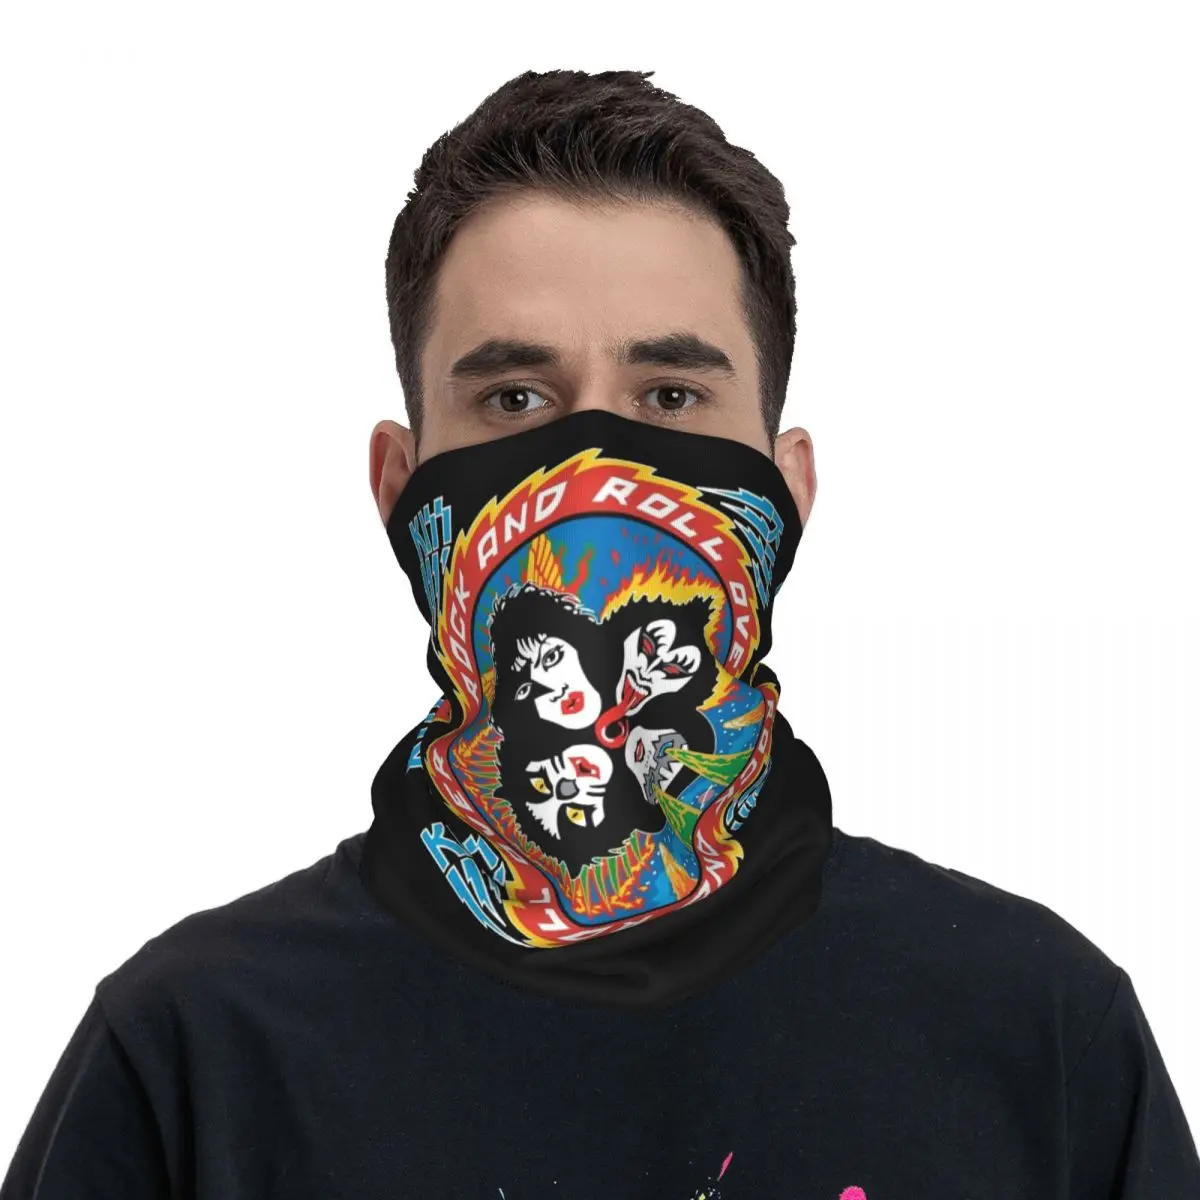 

2023 Funny Kiss Band Bandana Merchandise Neck Gaiter Printed Face Scarf Warm Headwear For Outdoor Sports Suit for All Season